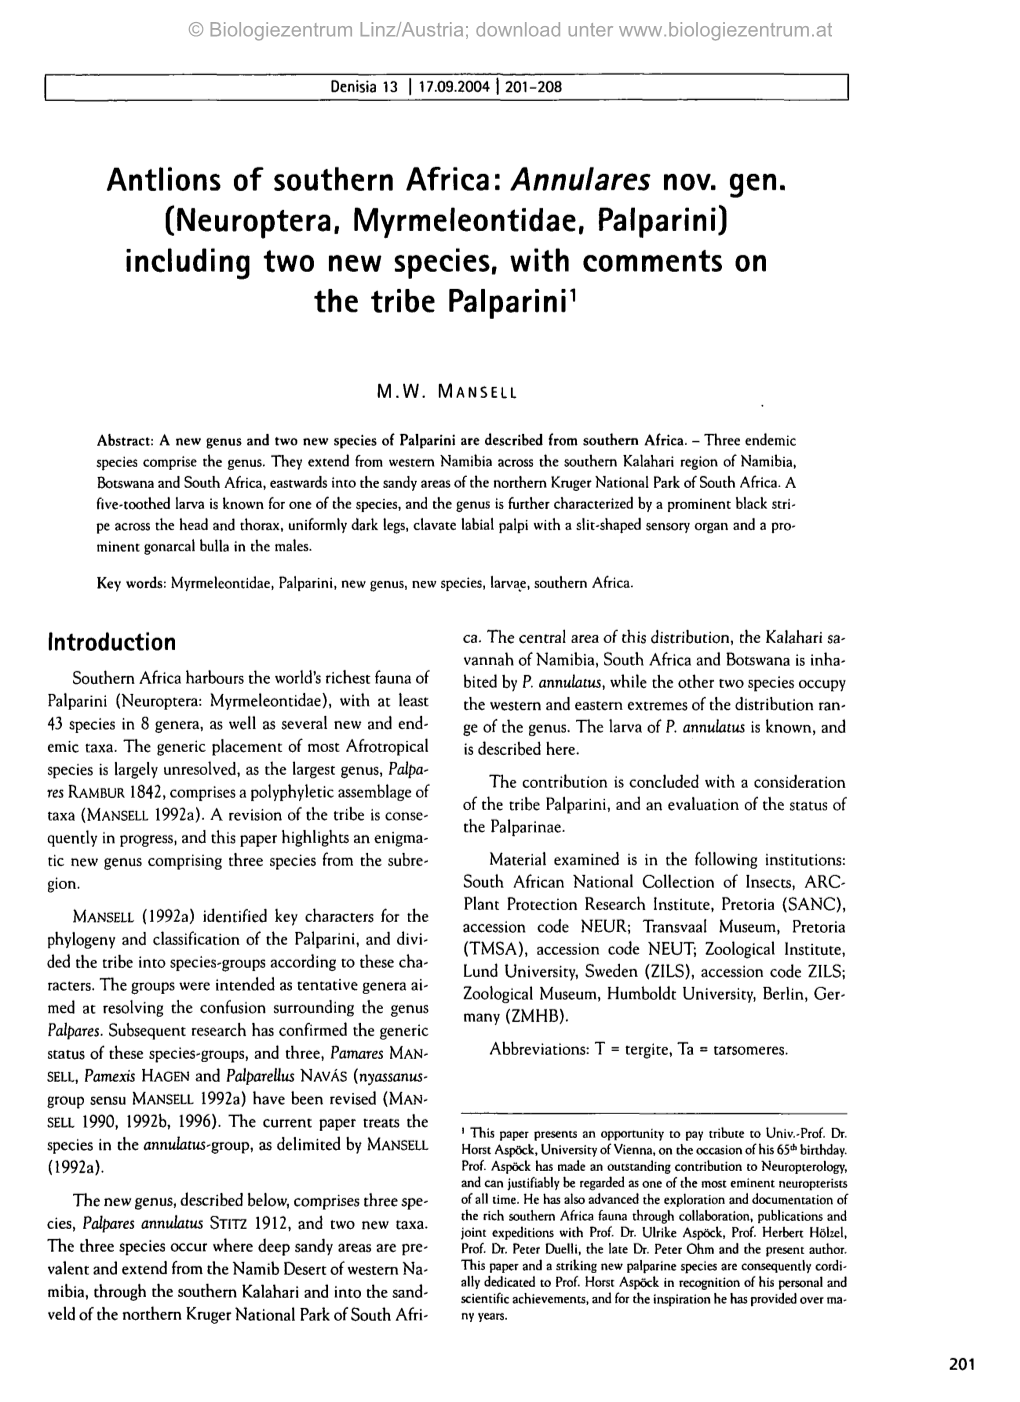 Annulares Nov. Gen. (Neuroptera, Myrmeleontidae, Palparini) Including Two New Species, with Comments on the Tribe Palparini1